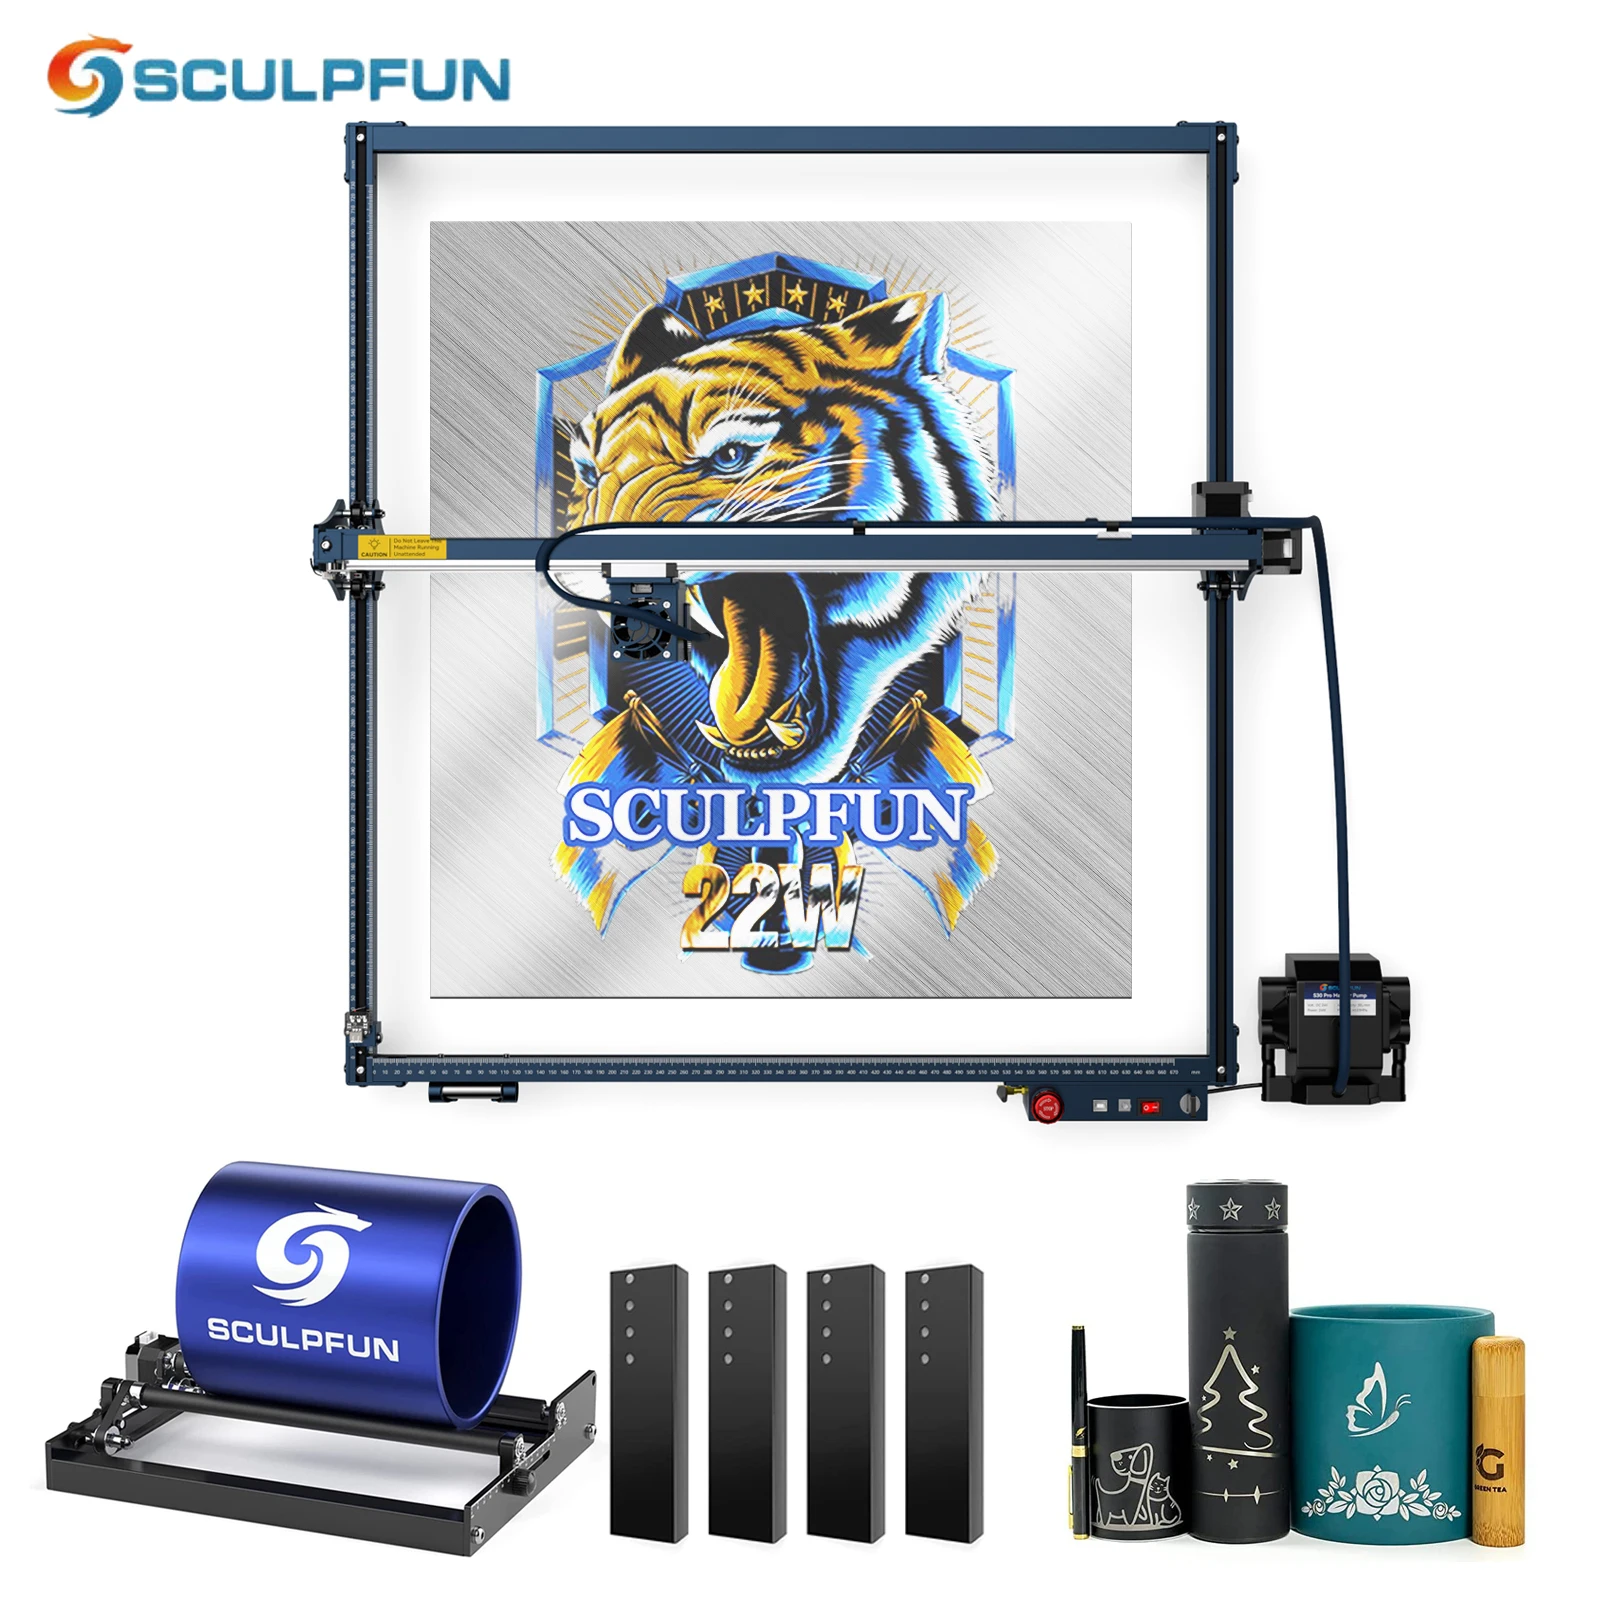 SCULPFUN S30 Ultra-22W Laser Engraving Machine 600x600mm Engraving Area with Automatic Air Assist Replaceable Lens protection